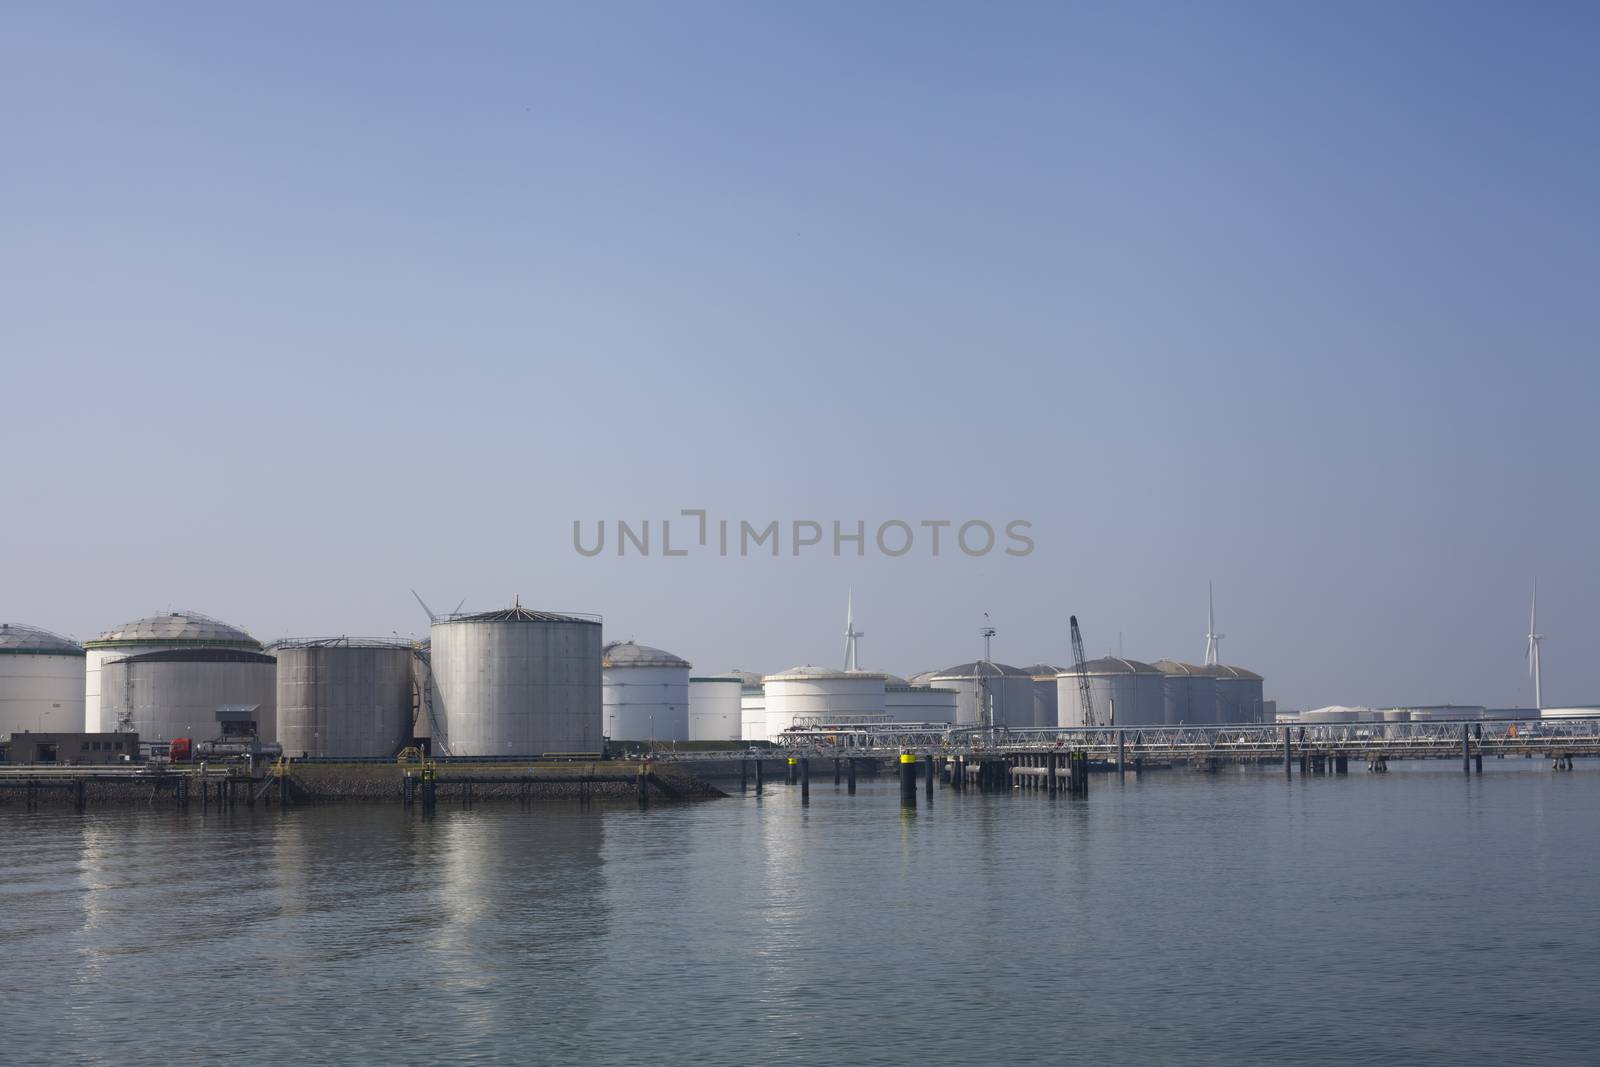 Oil refinery plant from industry zone, Aerial view oil and gas i by Tjeerdkruse